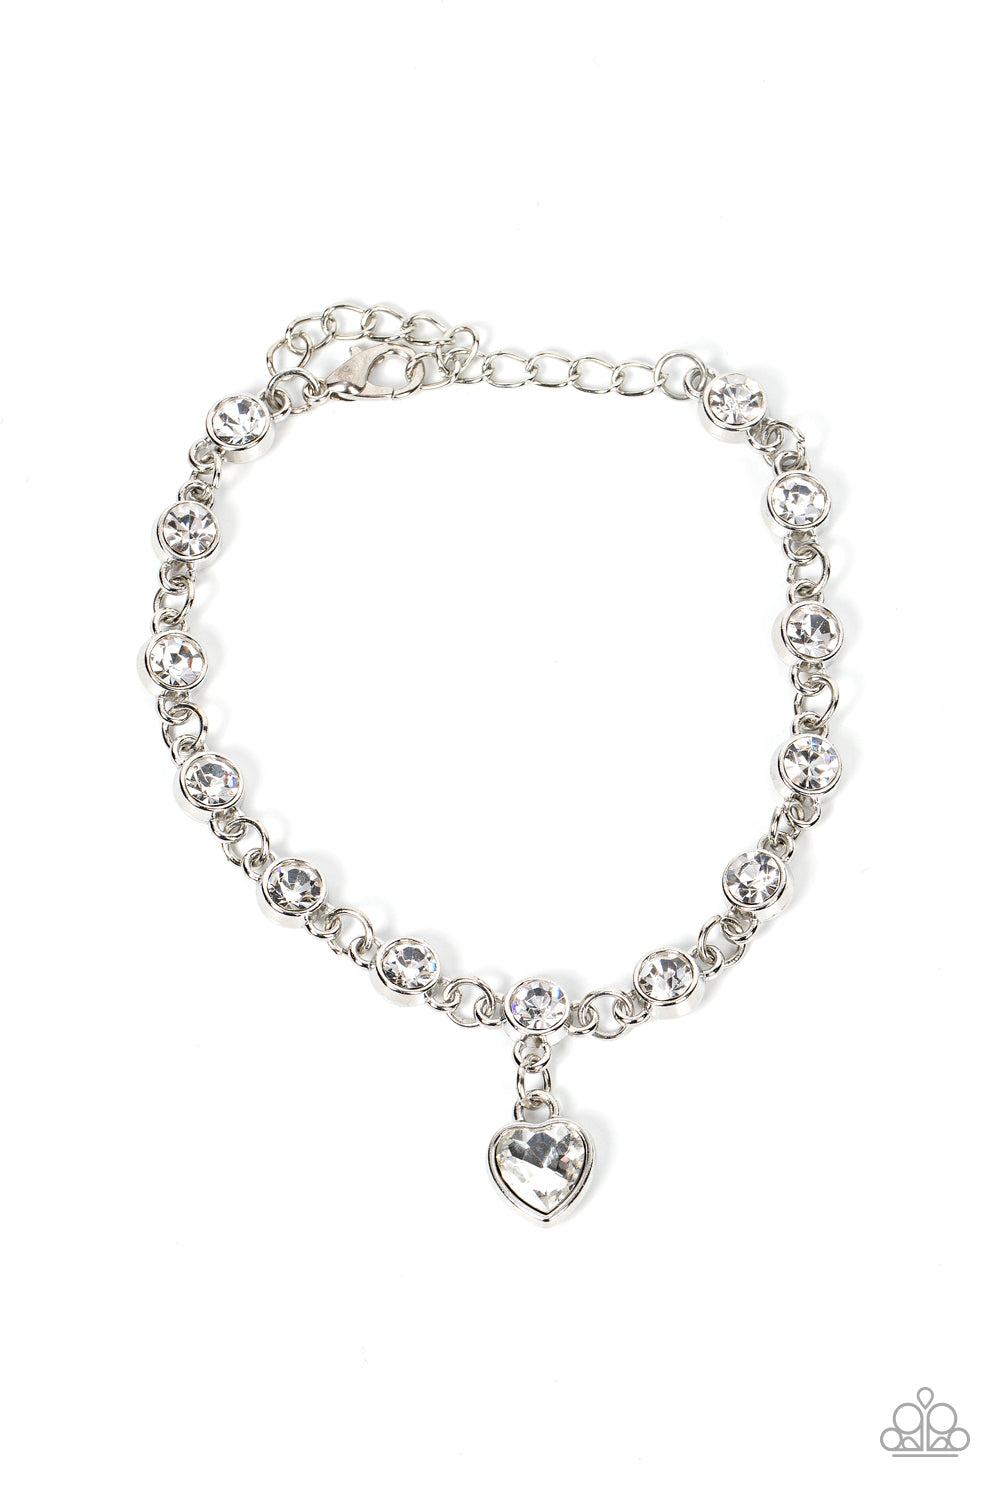 Paparazzi Truly Lovely - White Bracelet - A Finishing Touch Jewelry